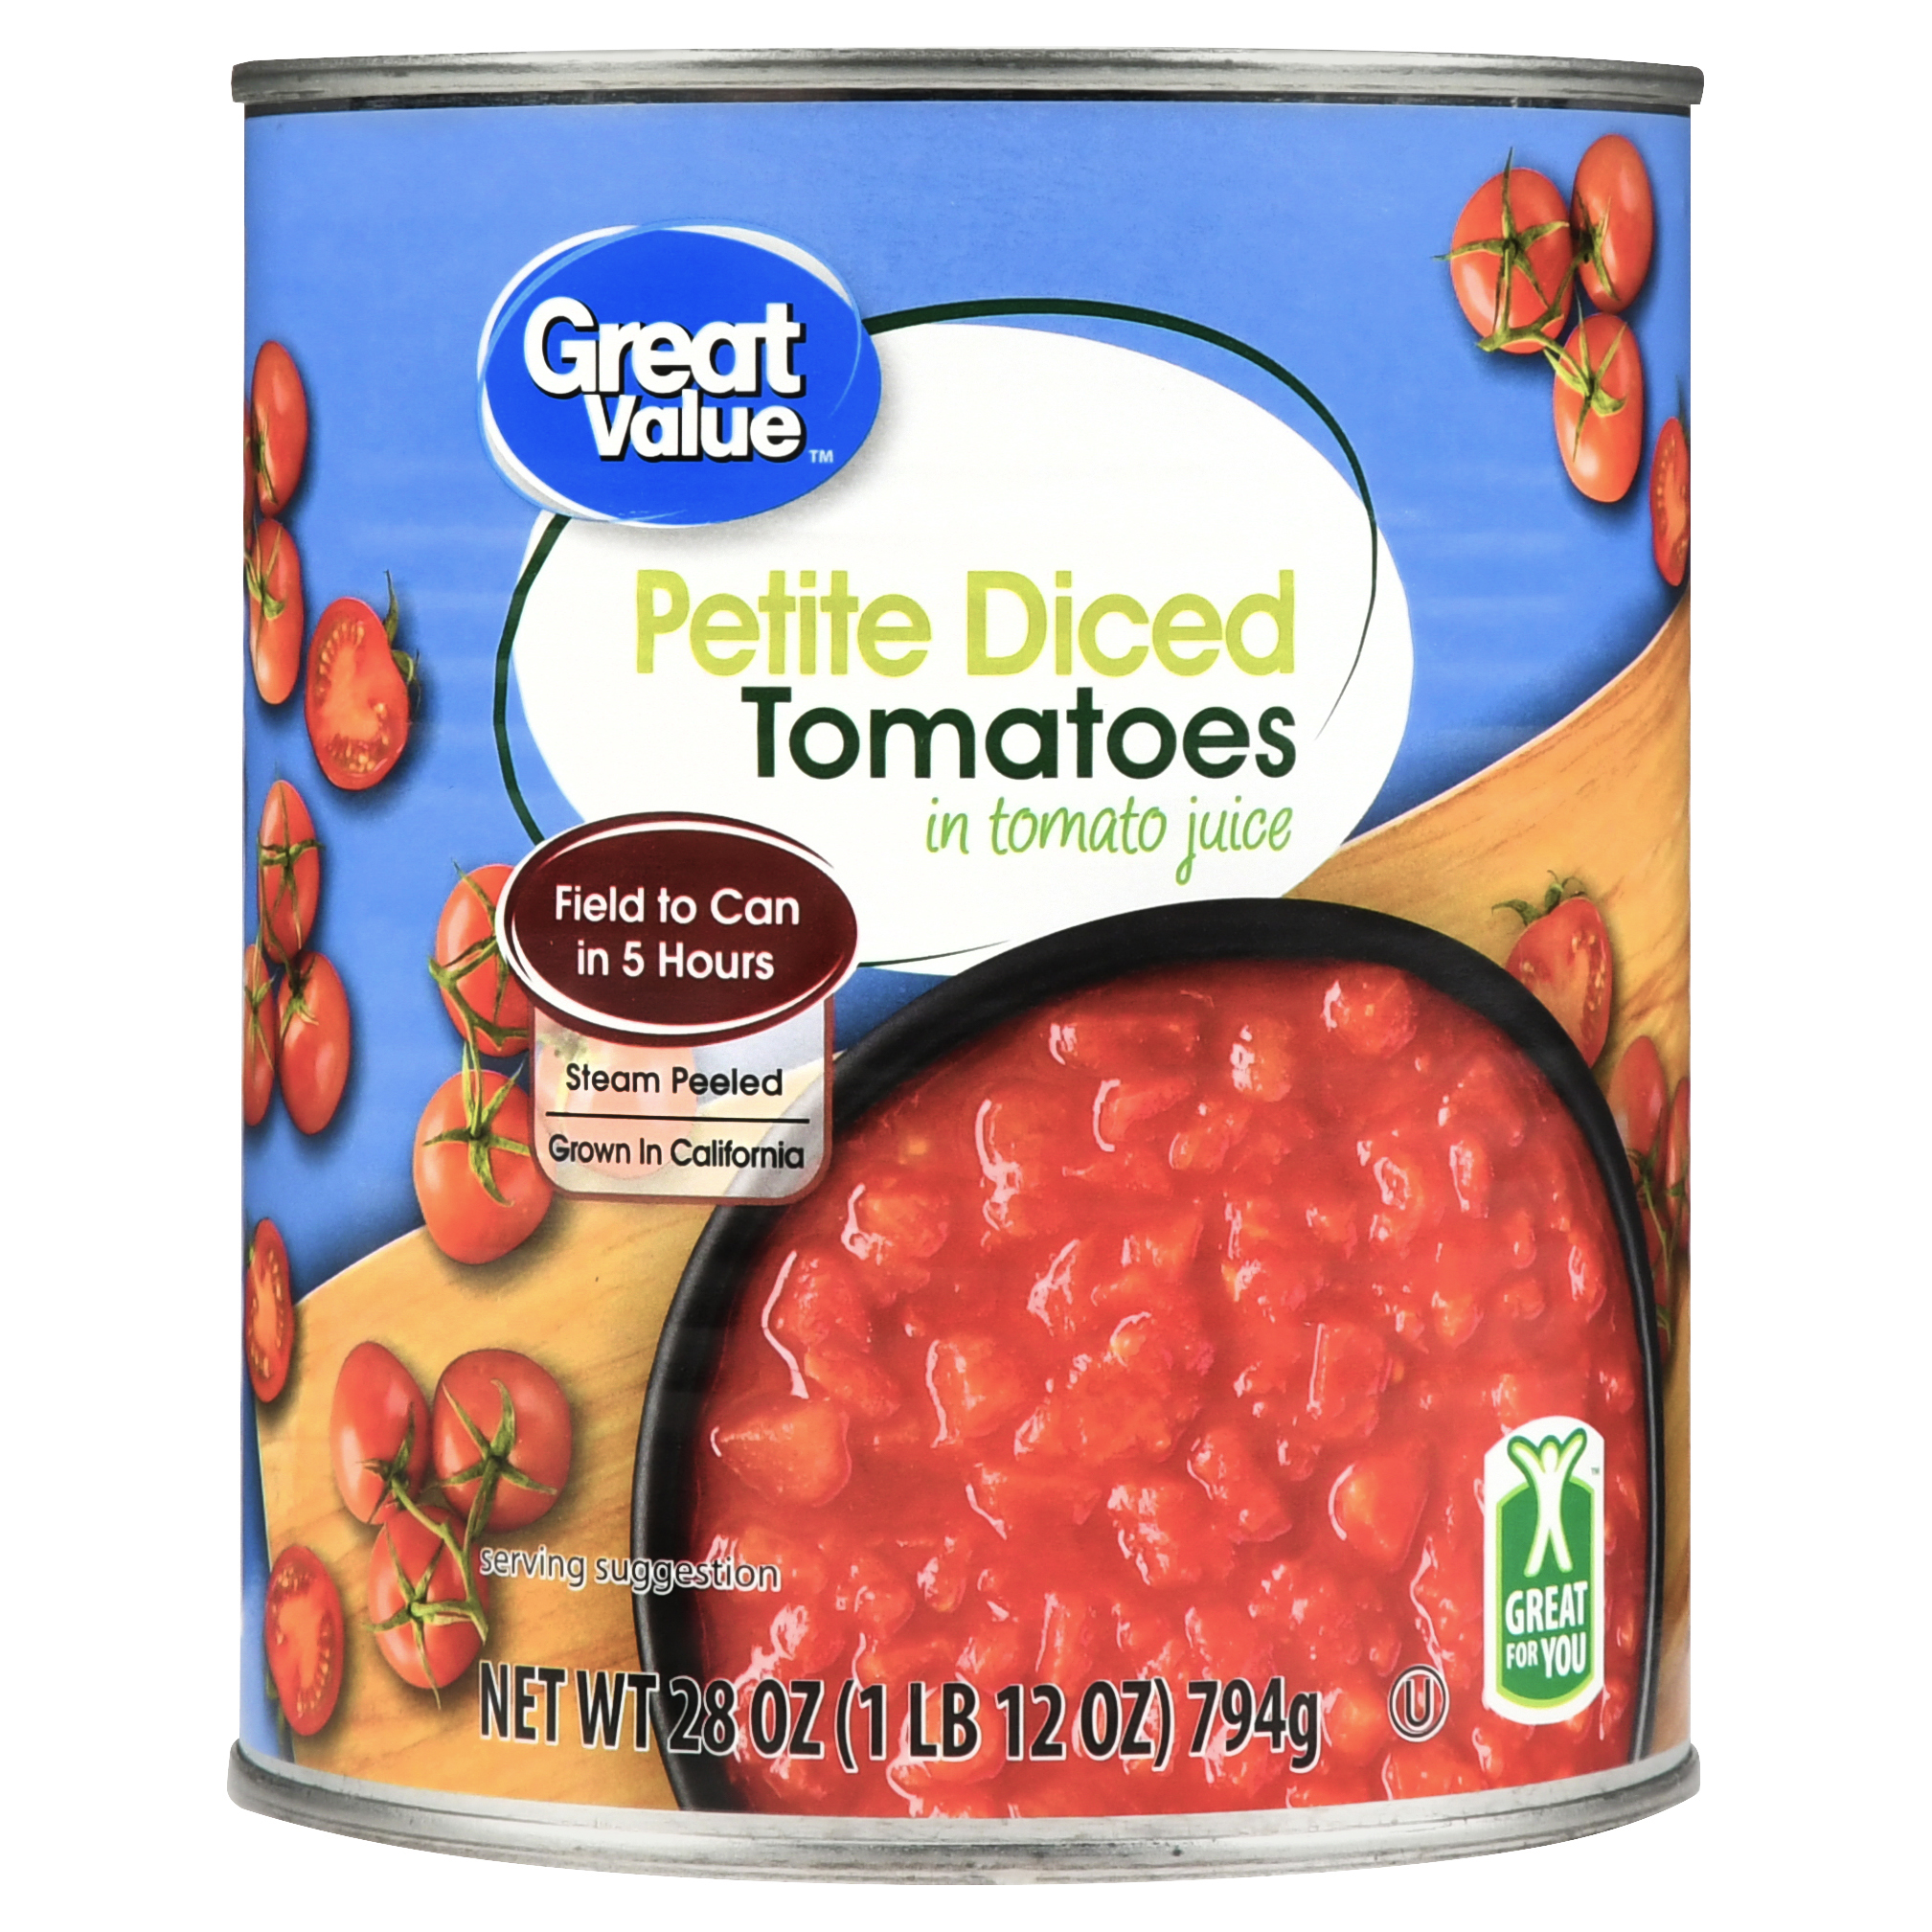 (6 Pack) Great Value Petite Diced Tomatoes in Tomato Juice, 28 Oz